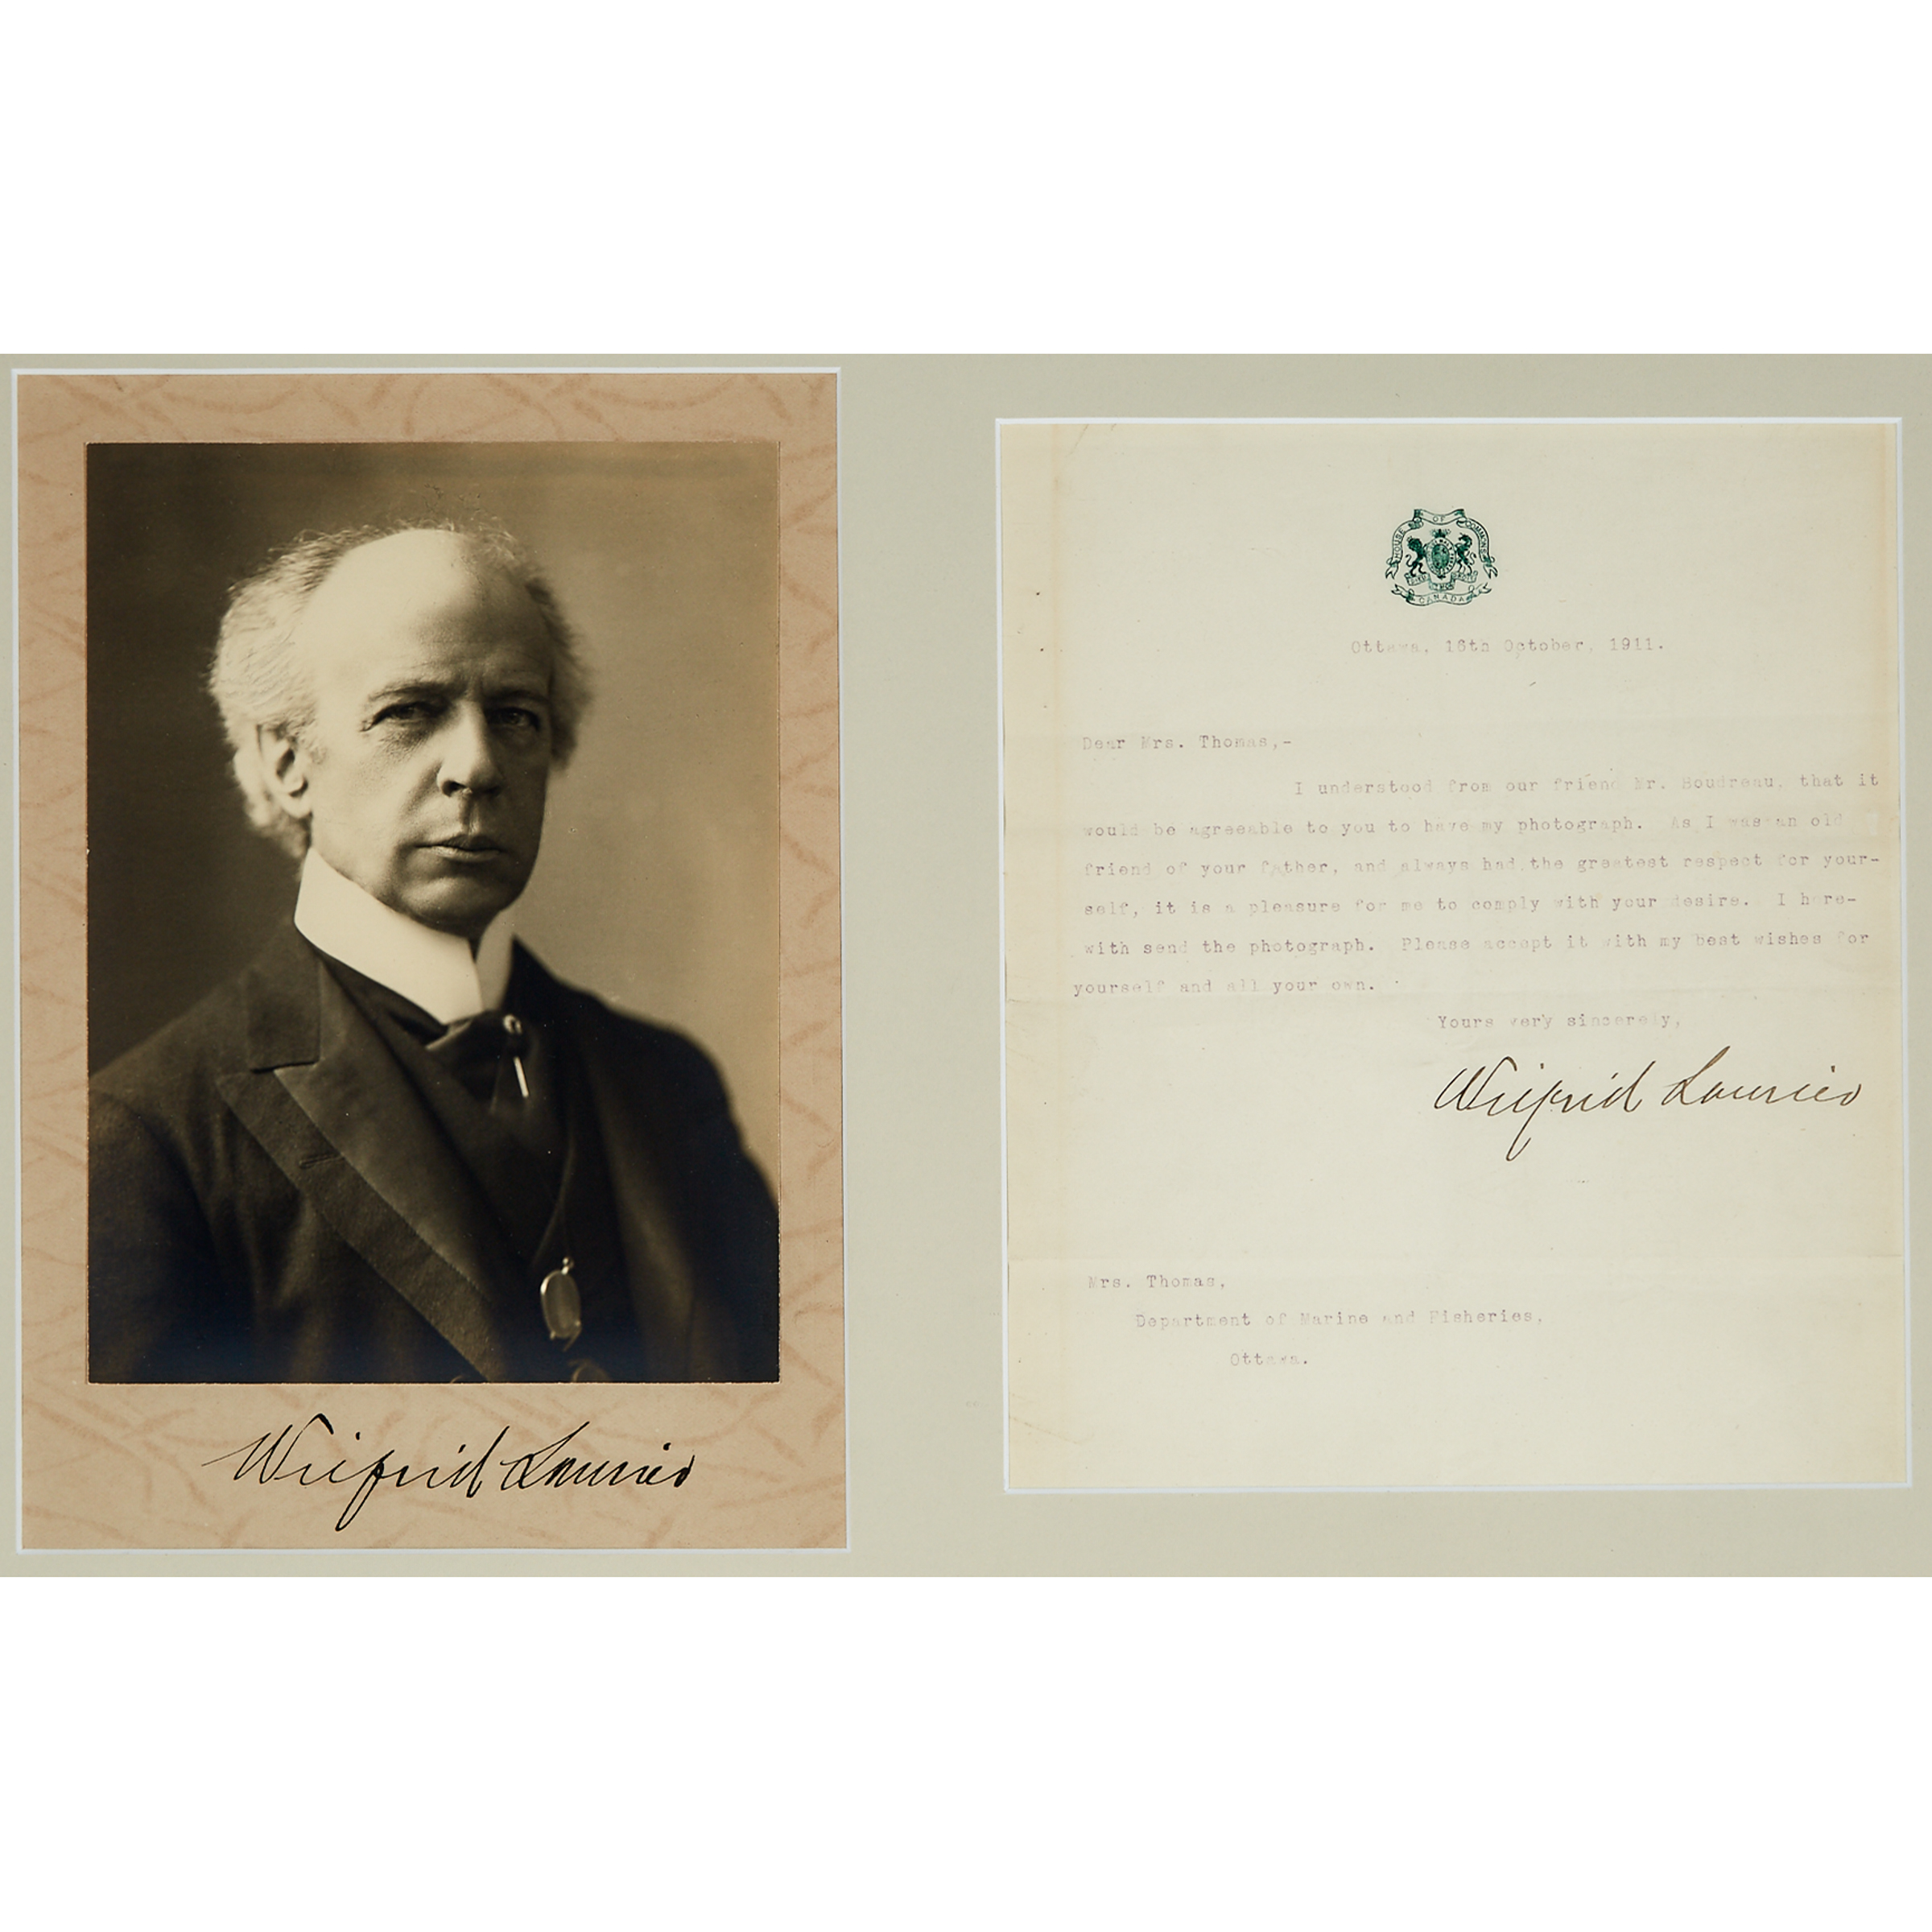 Sir Wilfrid Laurier Autographed Portrait and Letter, 1911 